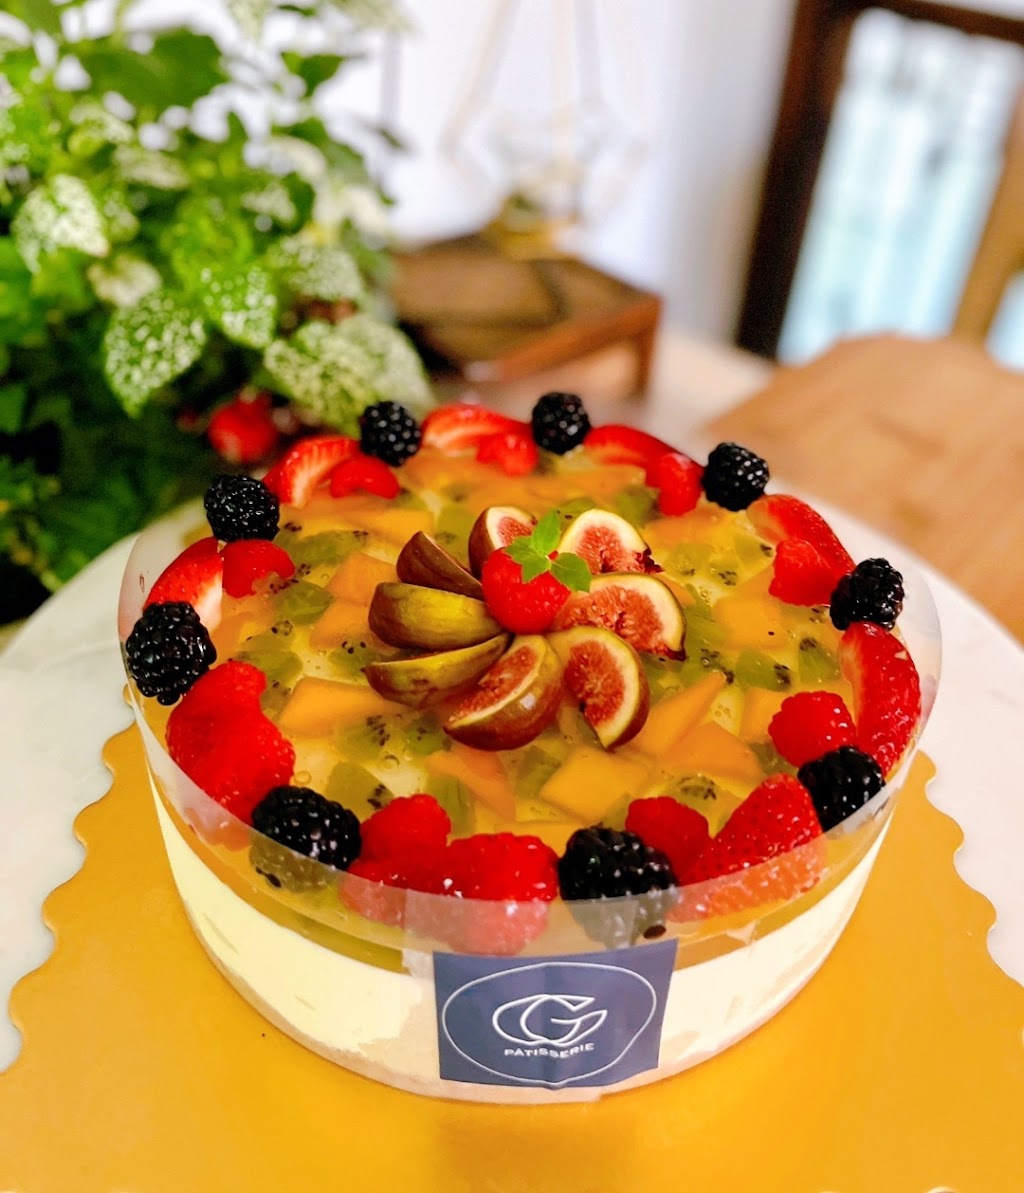 G&C Pâtisserie | 175 Commerce Valley Dr W #102, Thornhill, ON L3T 7P6, Canada | Phone: (905) 771-6183